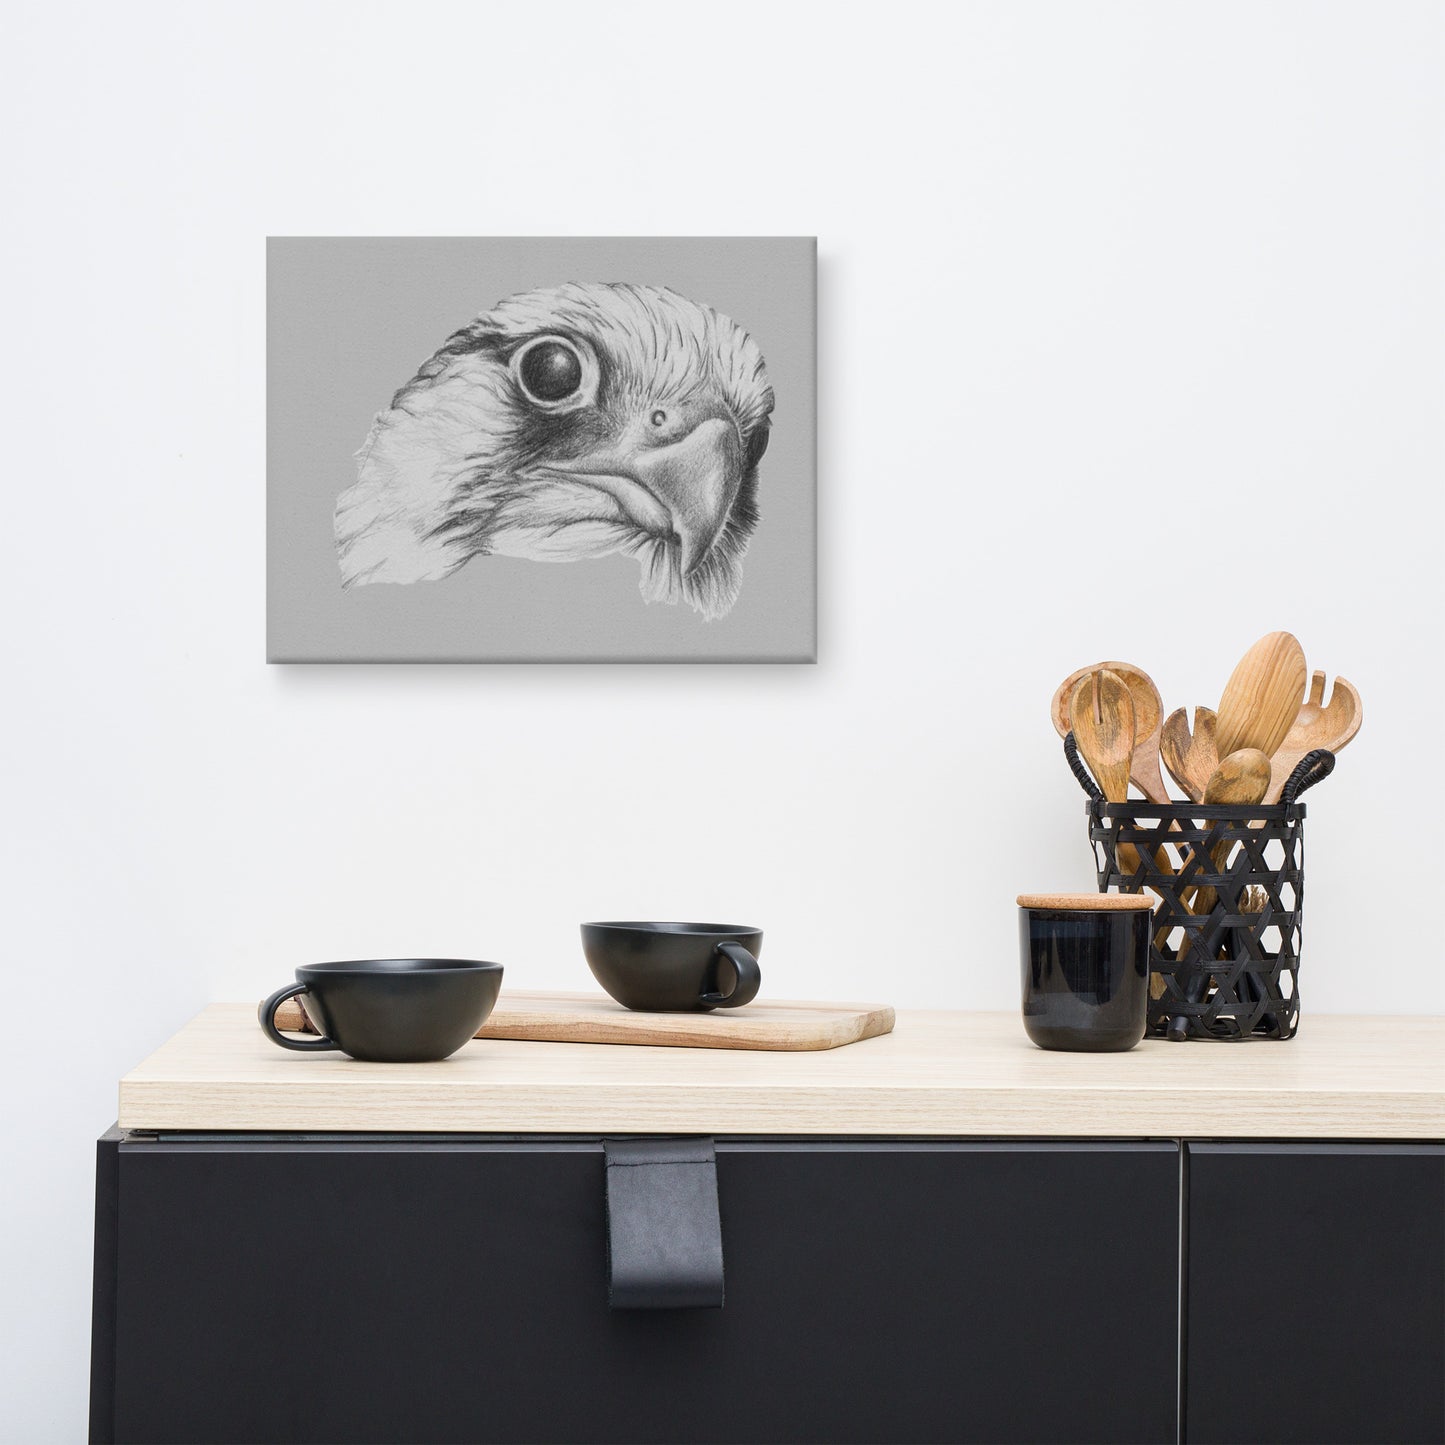 These "Hawk Canvas Wall Hangings" are from a drawing of mine created with a graphite pencil. It has been digitally optimized and transferred to a poly-cotton blend canvas.